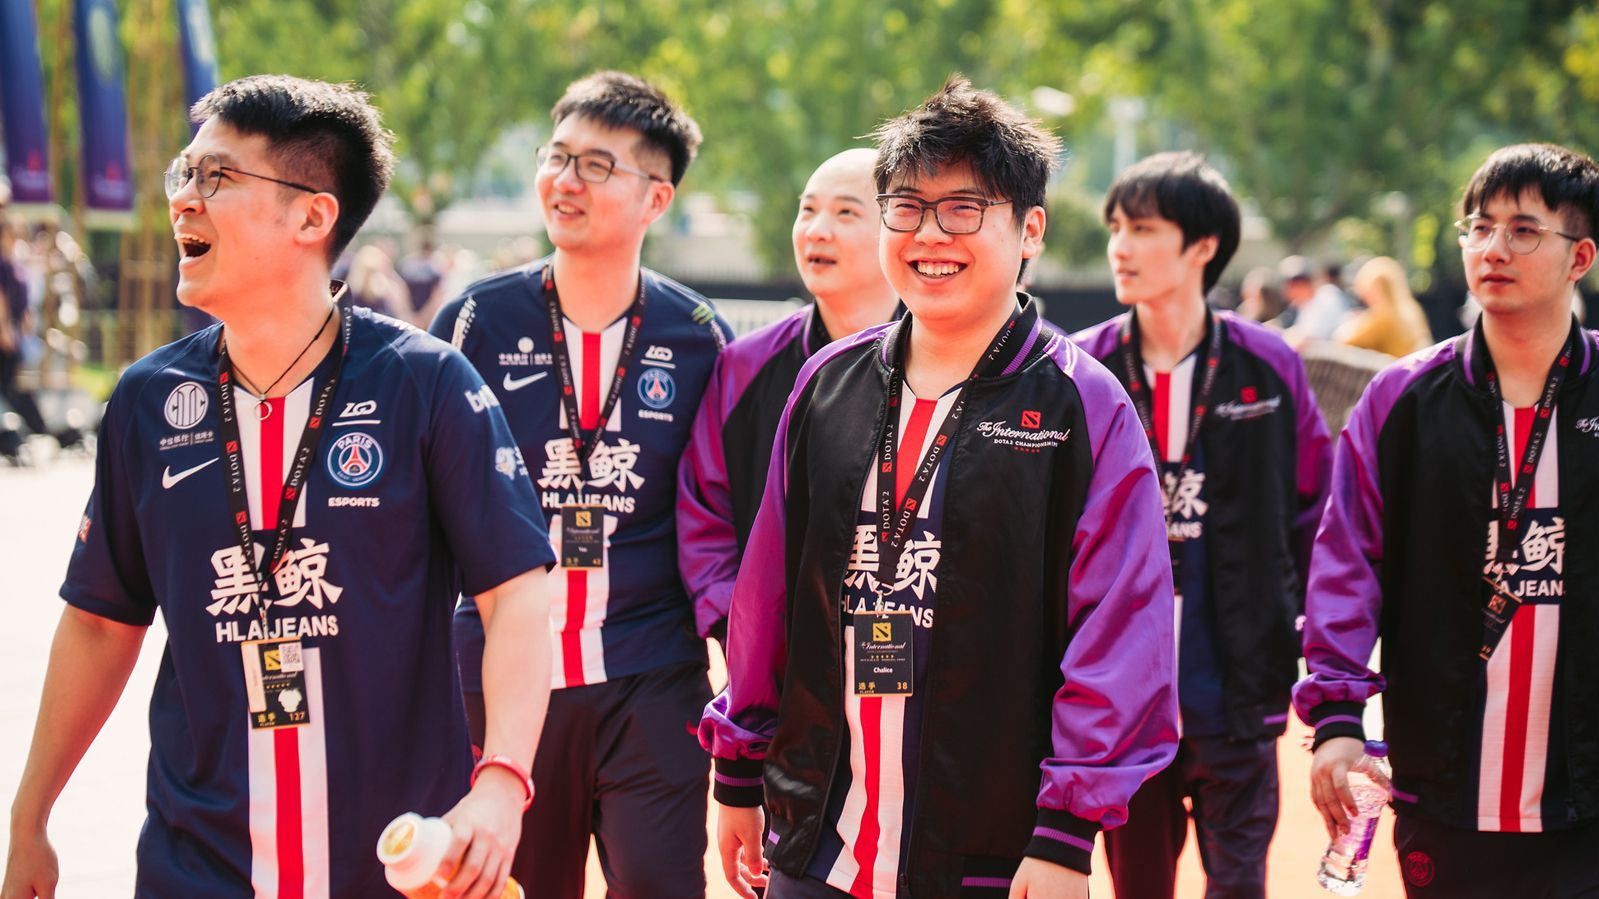 PSG.LGD makes lastminute roster change just hours before the LA Major